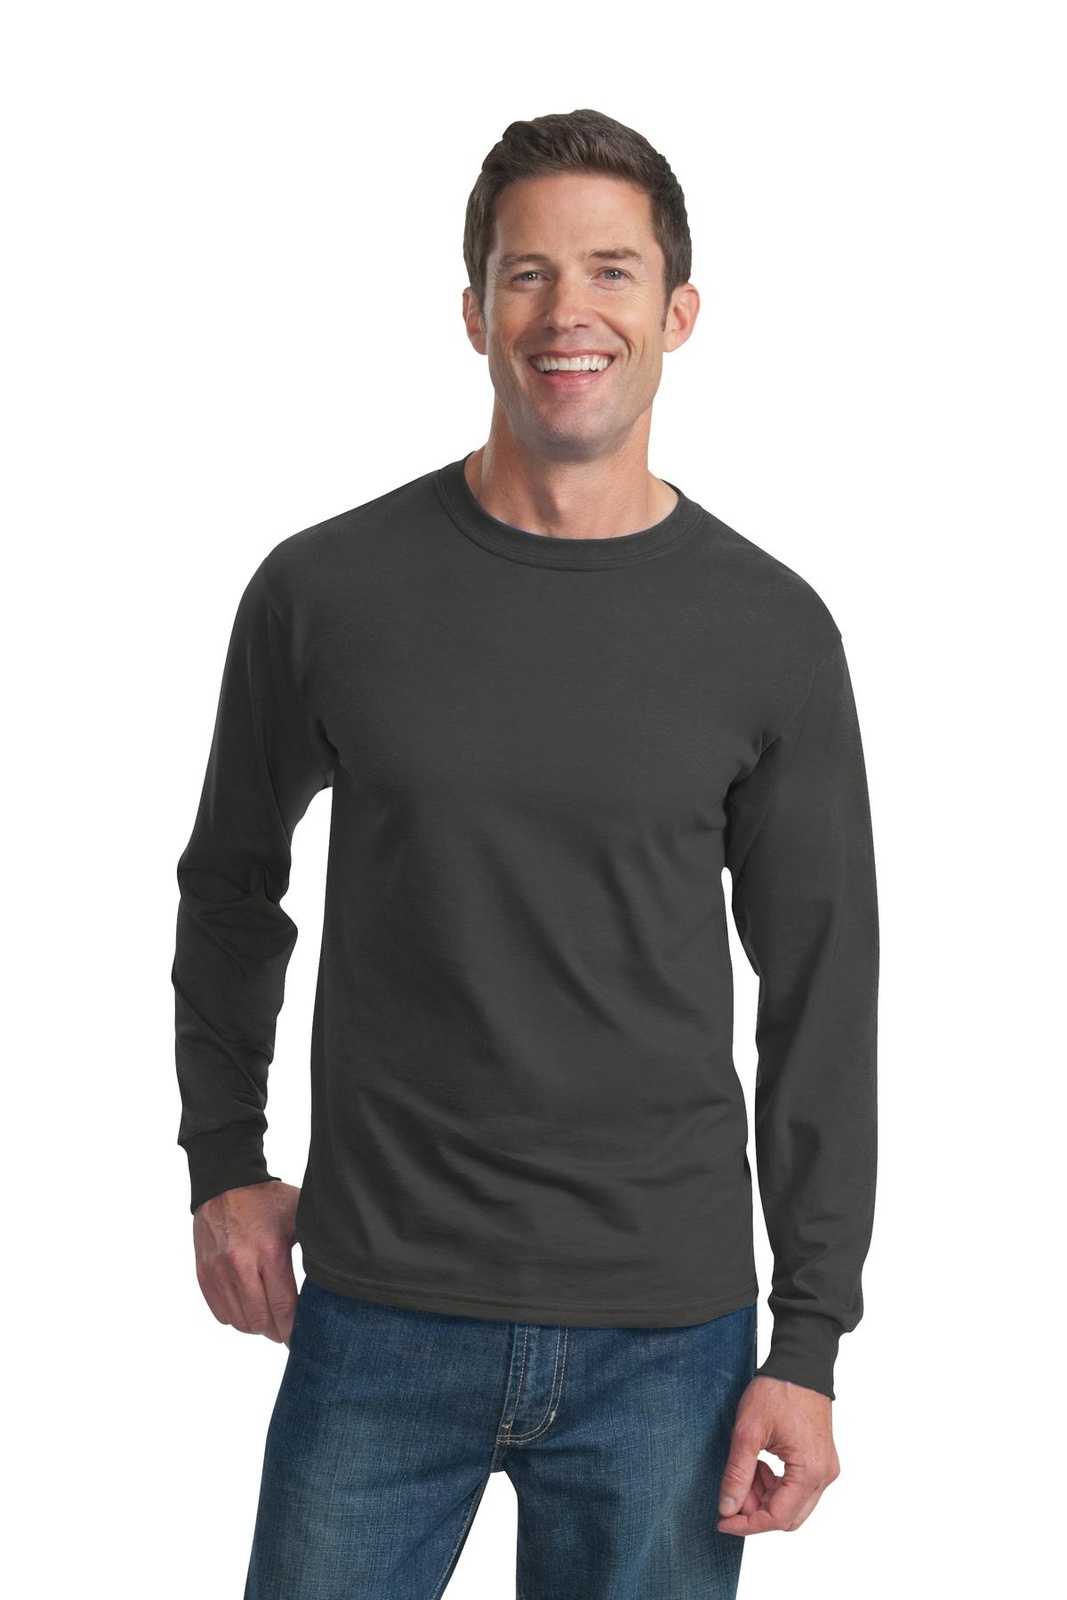 Fruit of the Loom 4930 HD Cotton 100% Cotton Long Sleeve T-Shirt - Charcoal Gray - HIT a Double